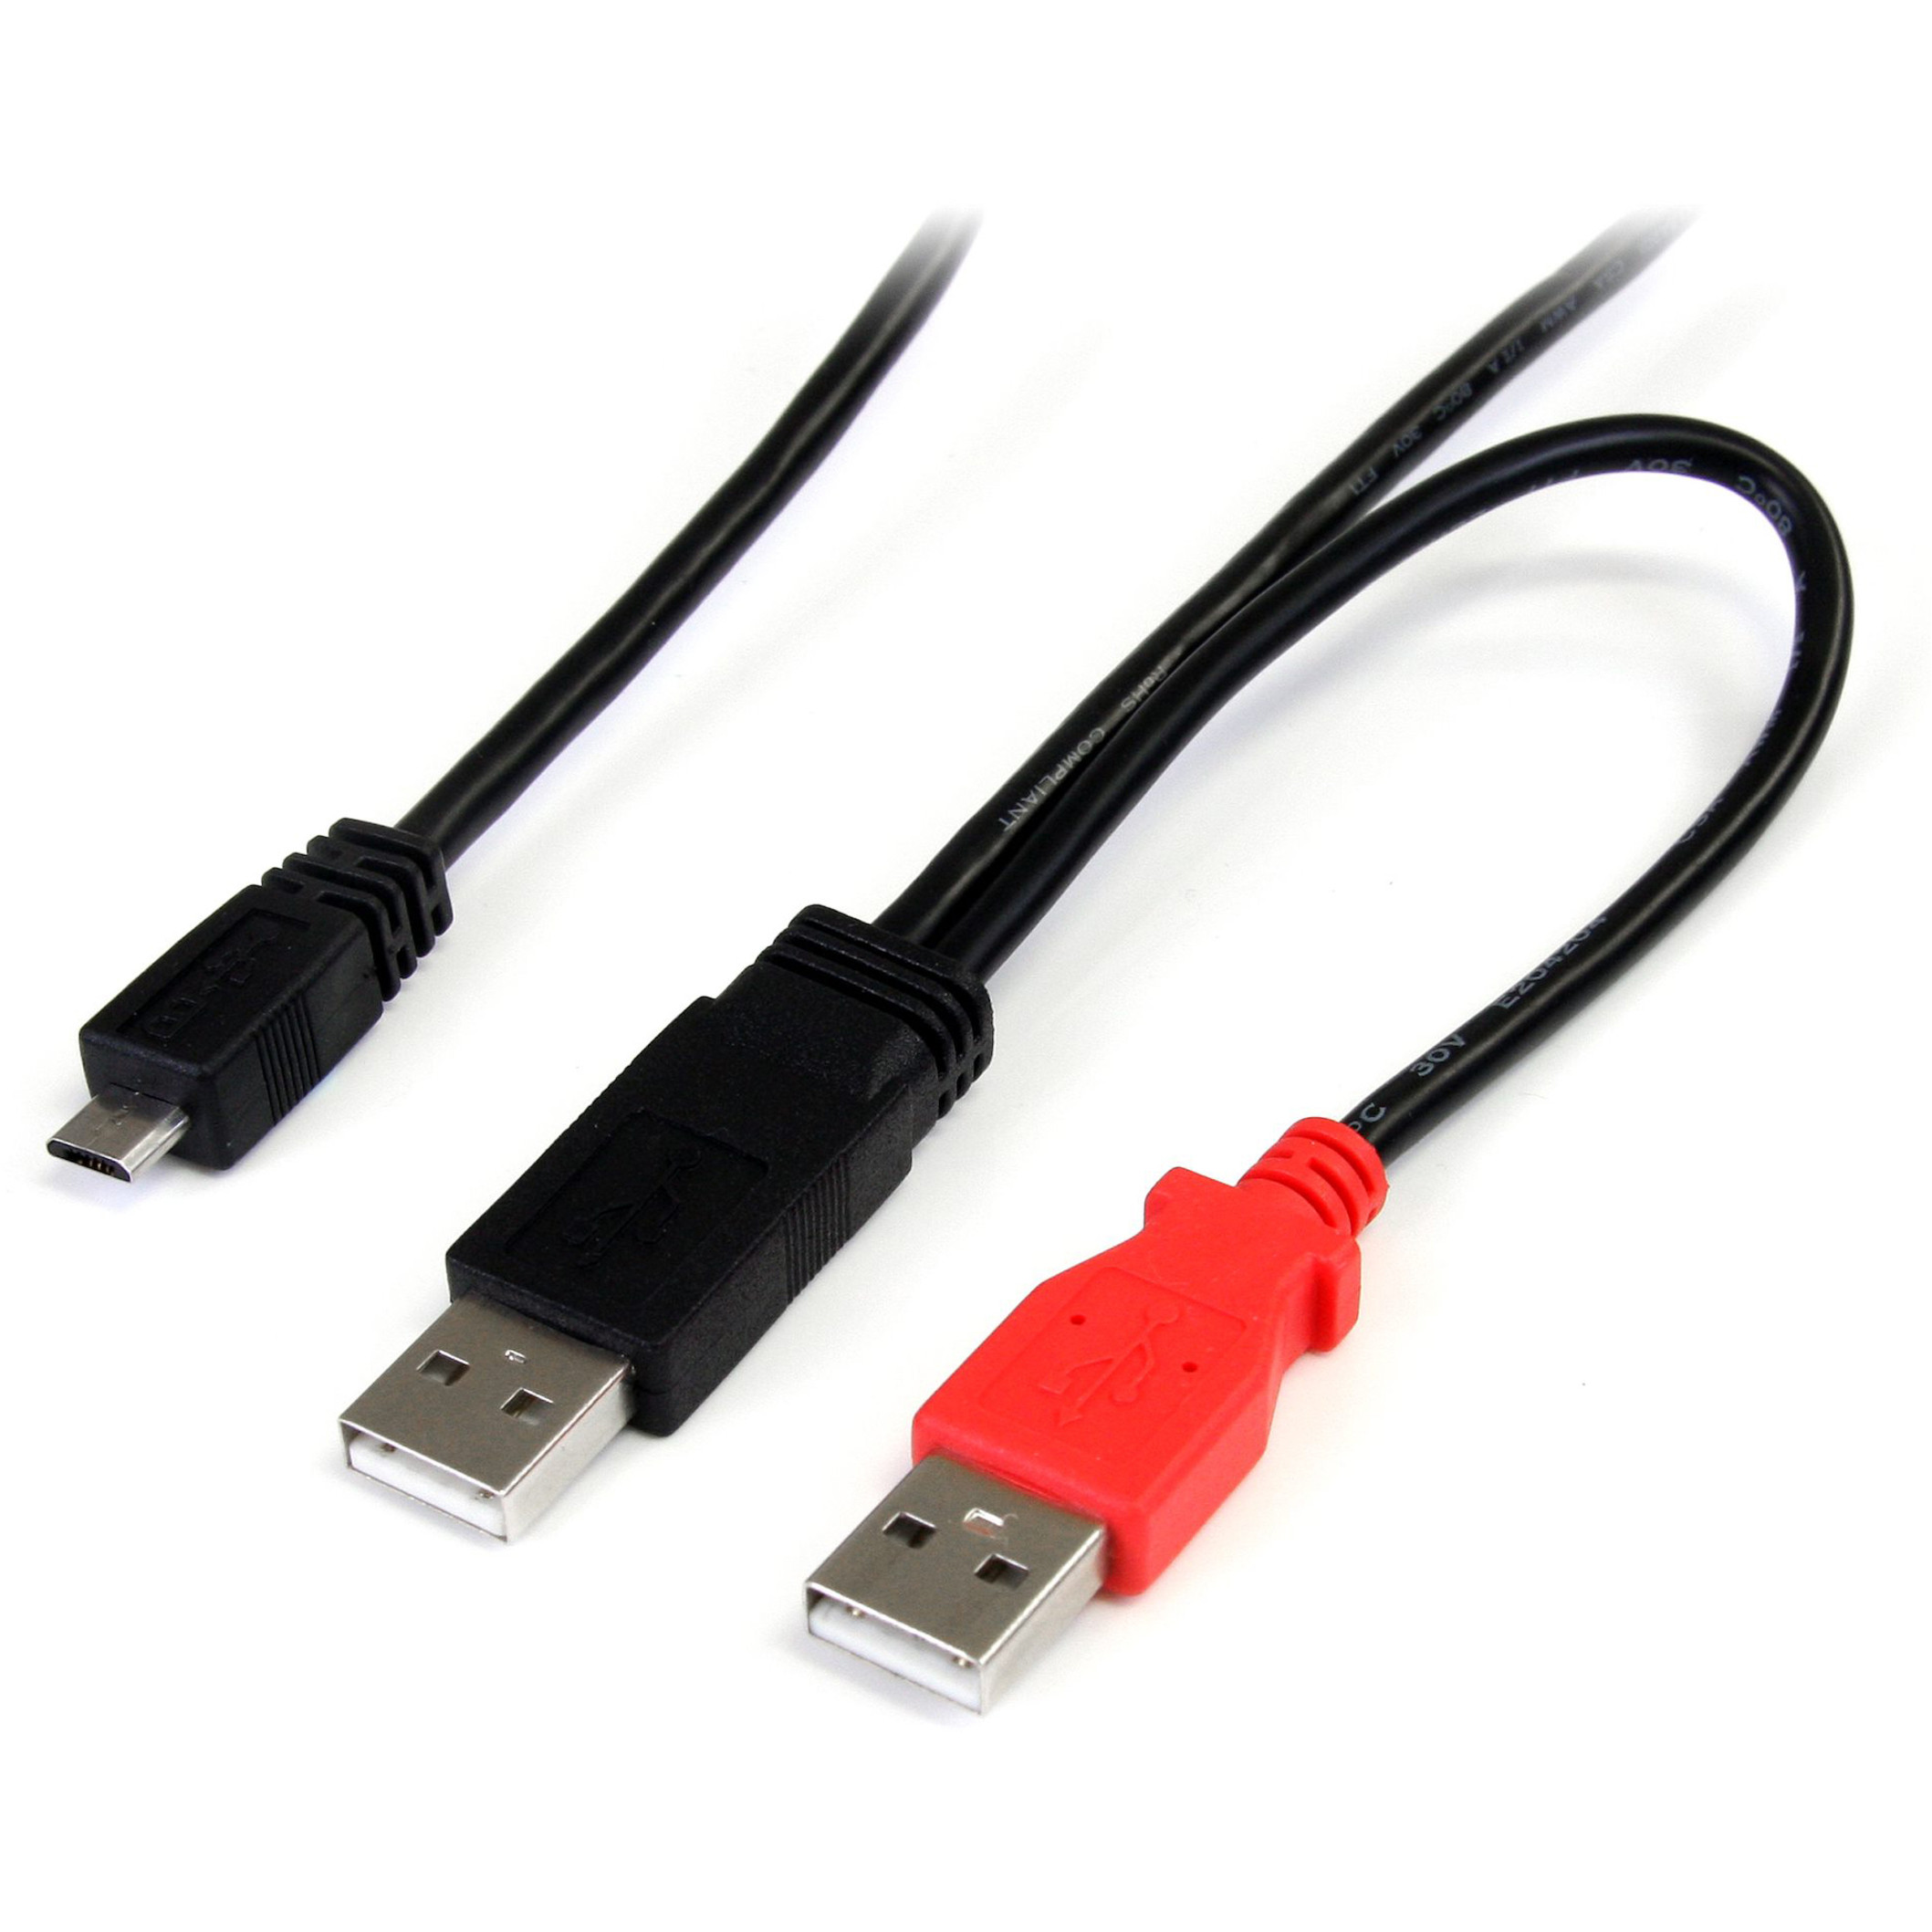 Startech .com 1 ft USB Y Cable for External Hard DriveDual USB A to Micro BType A Male USBMicro Type B Male USB1ftBlack USB2HAUBY1